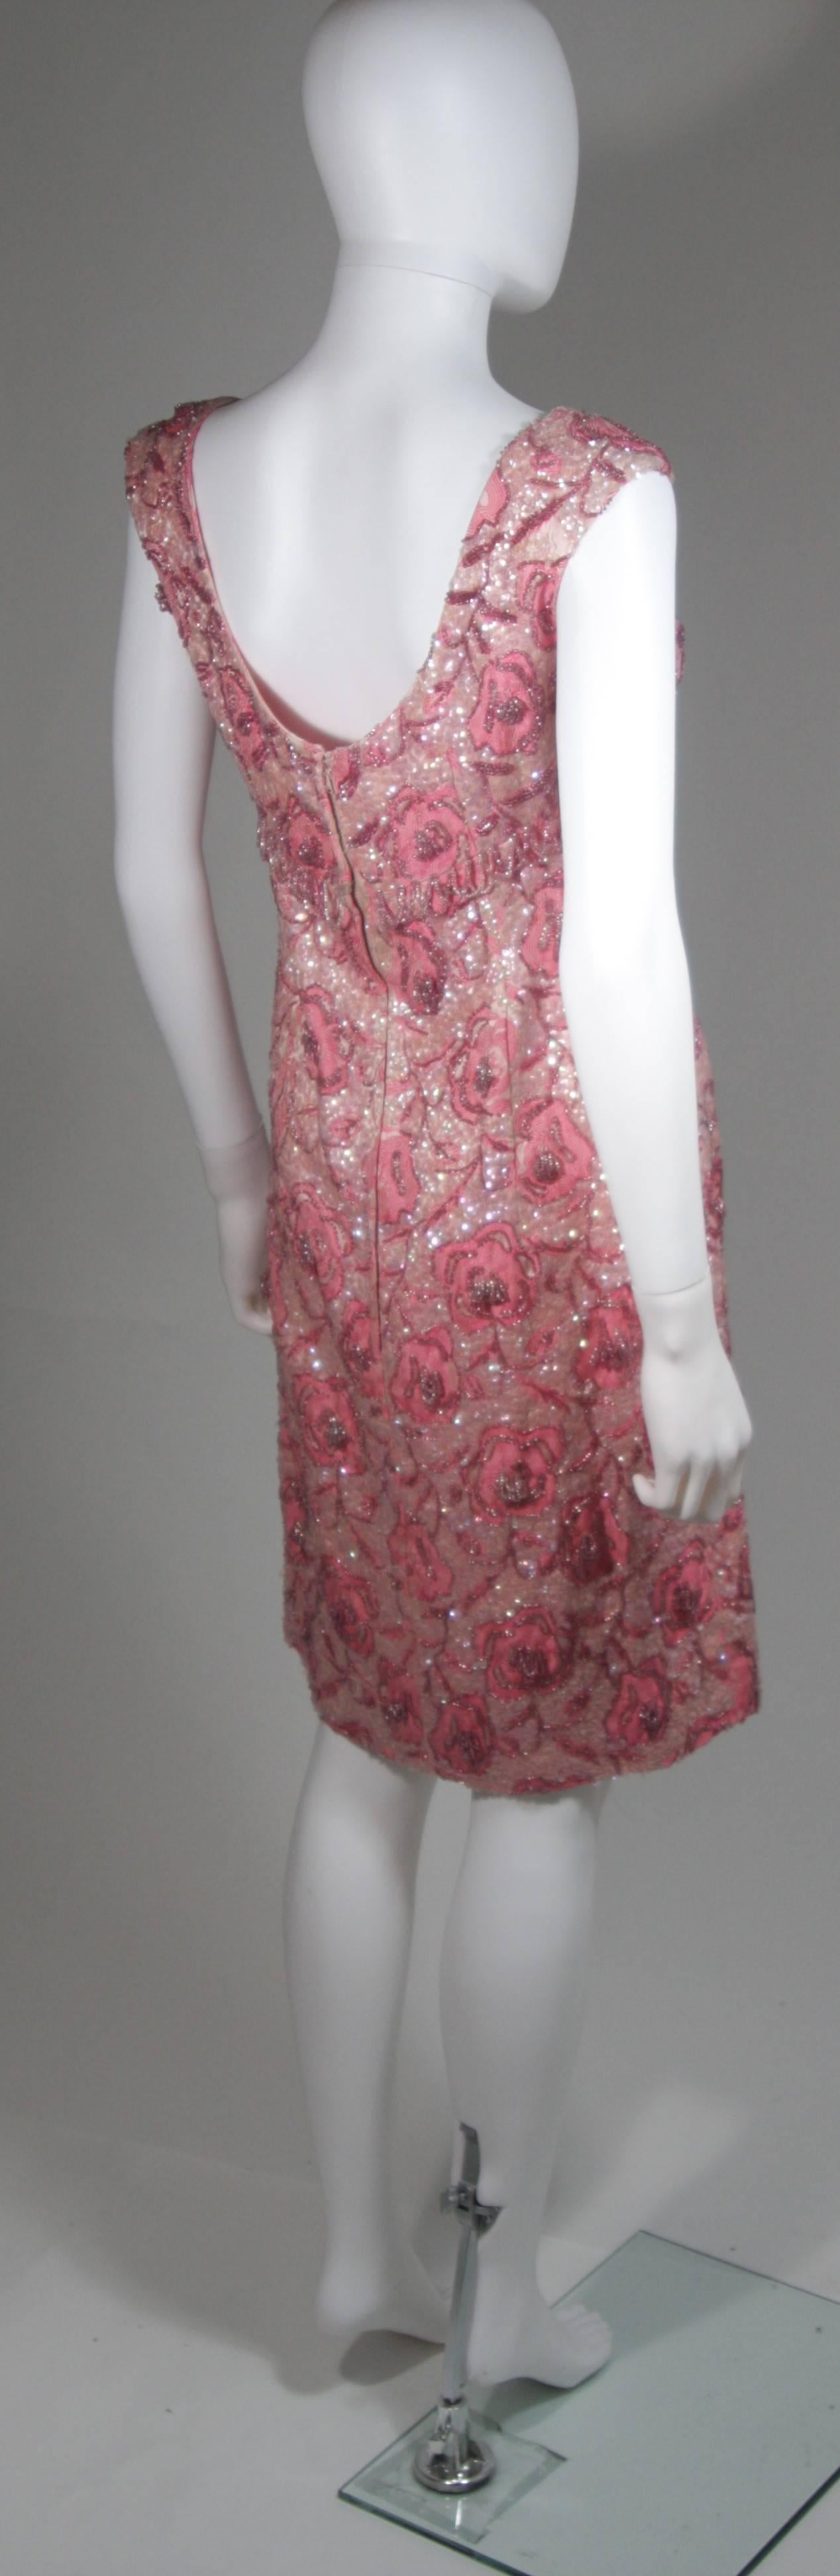 Women's 1960's SAKS 5TH AVE Pink Floral Brocade Hand Beaded Cocktail Dress Sz 4 For Sale